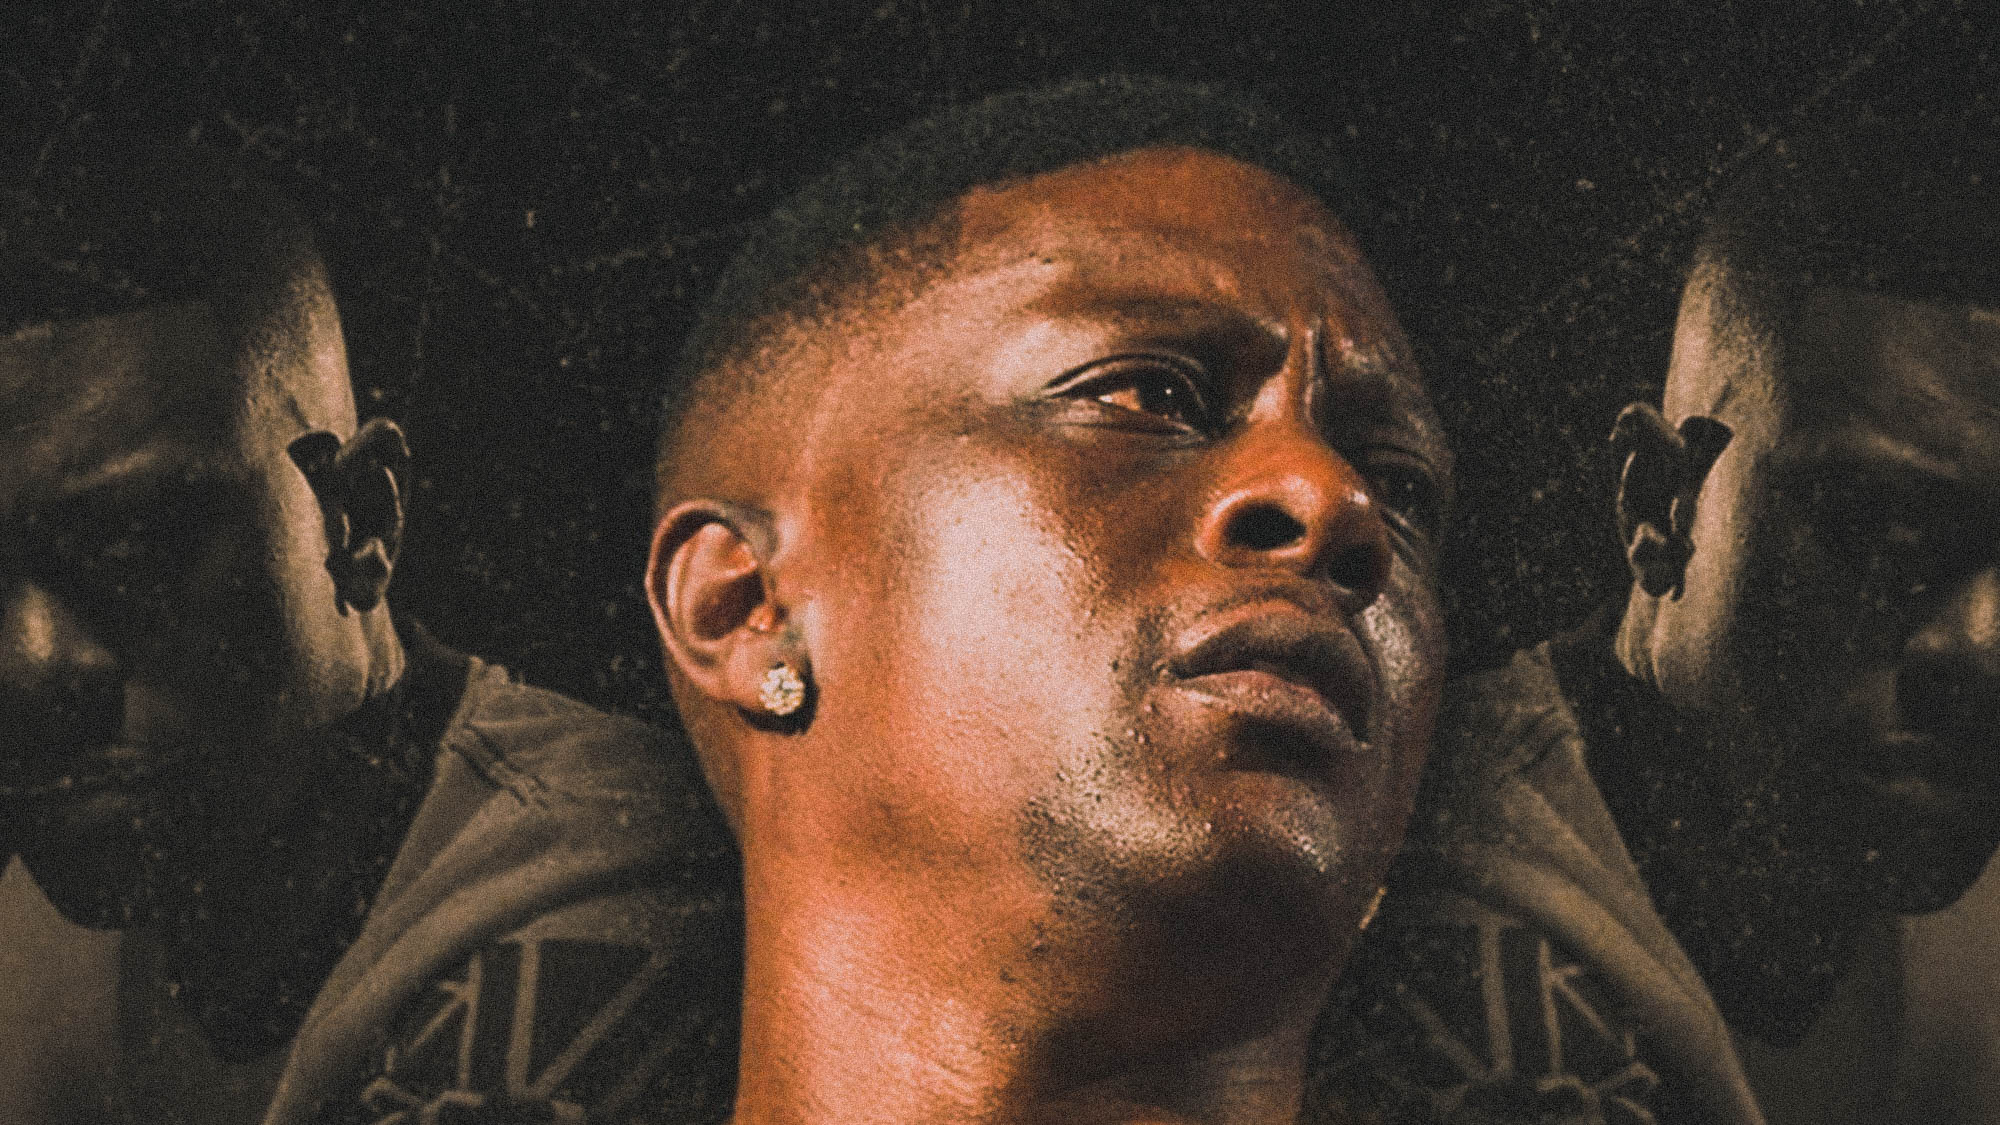 Boosie once again has another predicament with Lil Nas X on social media